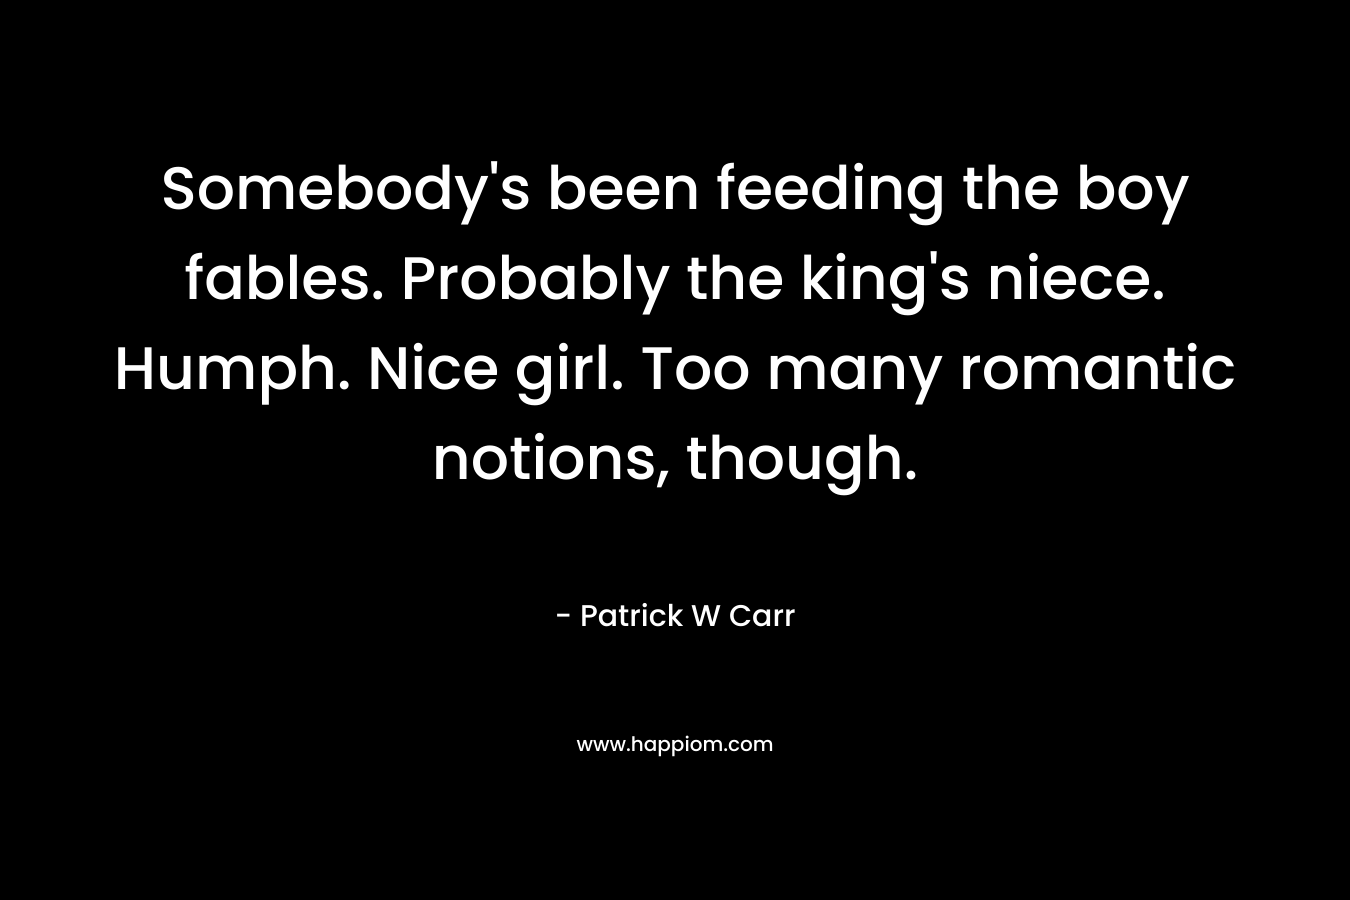 Somebody’s been feeding the boy fables. Probably the king’s niece. Humph. Nice girl. Too many romantic notions, though. – Patrick W Carr